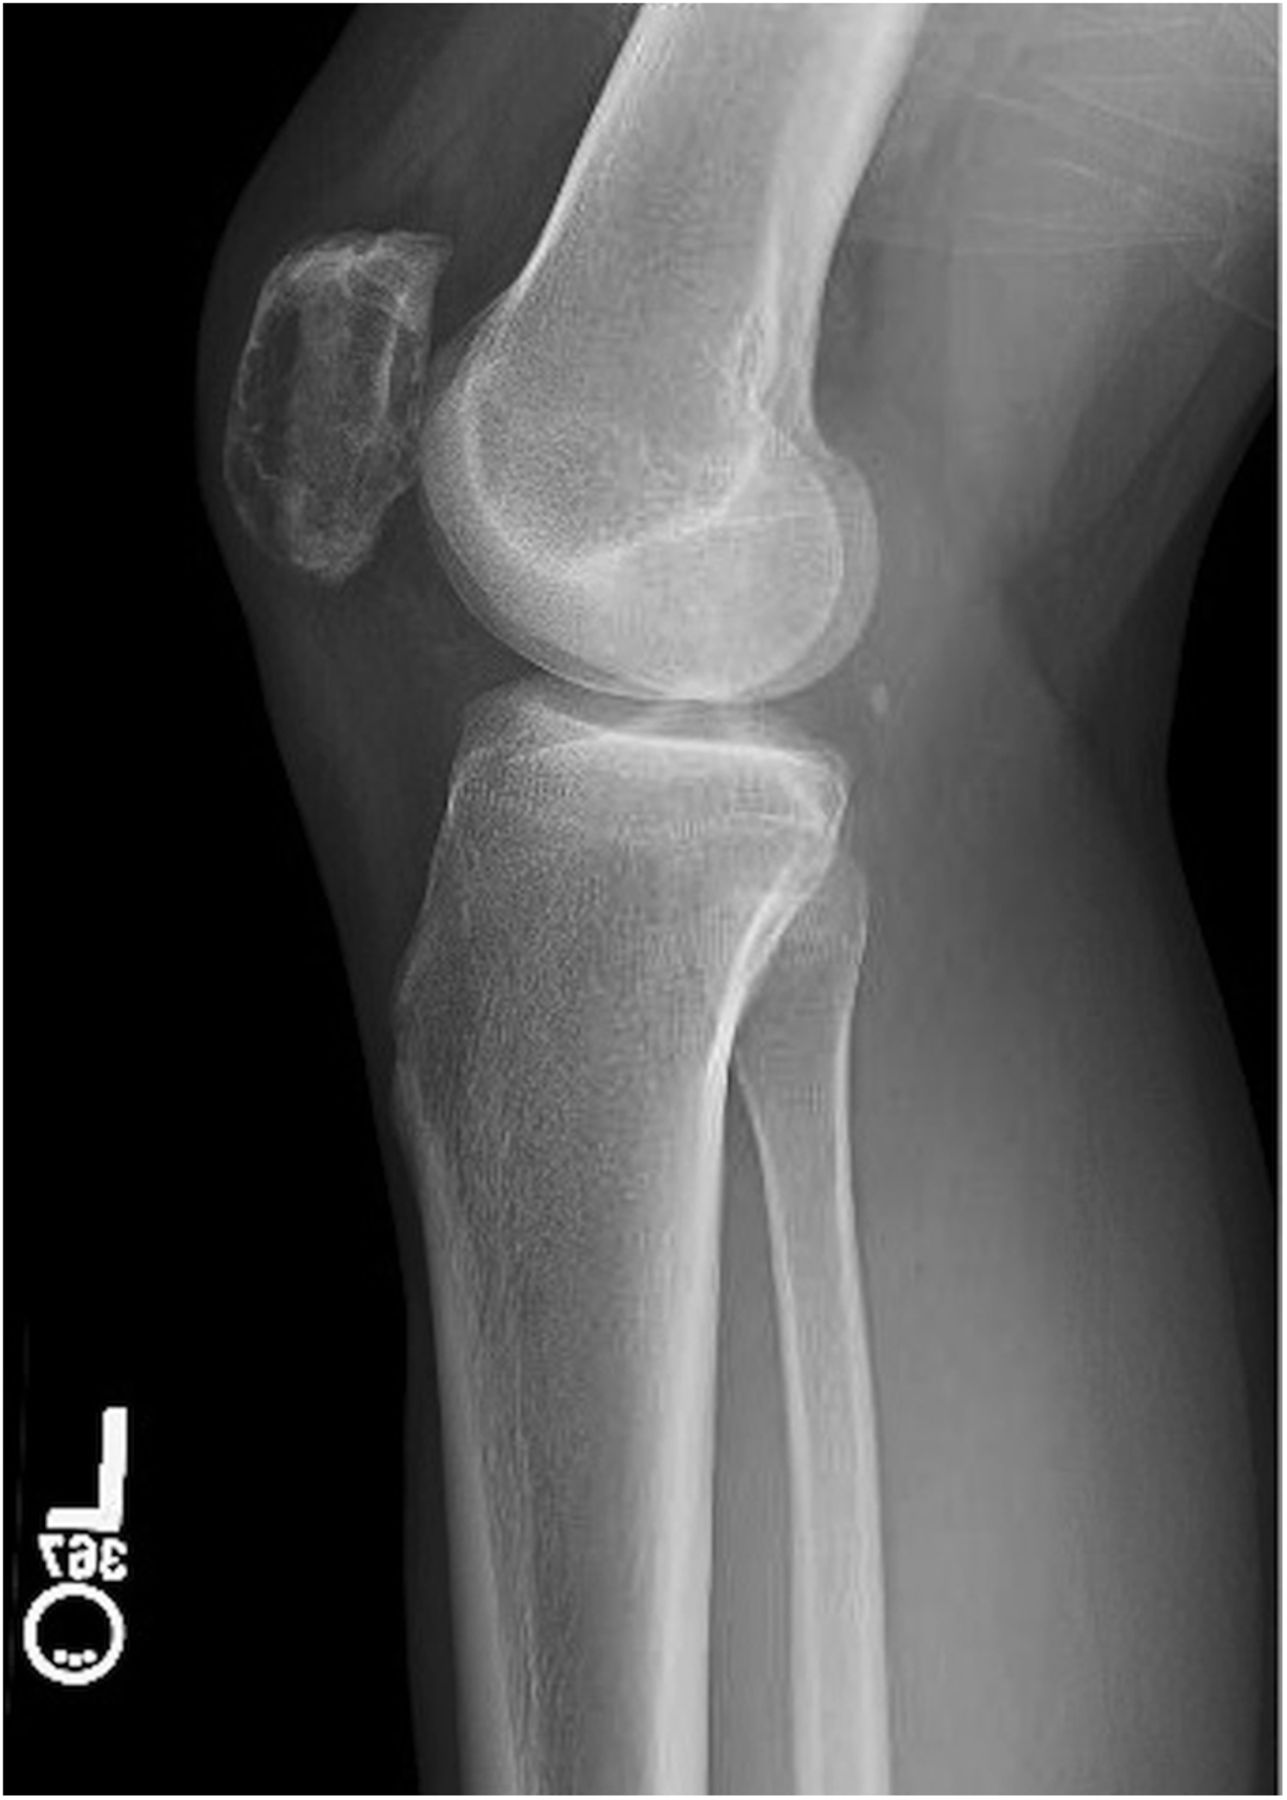 A 33YearOld Man with Left Knee Pain JBJS Image Quiz